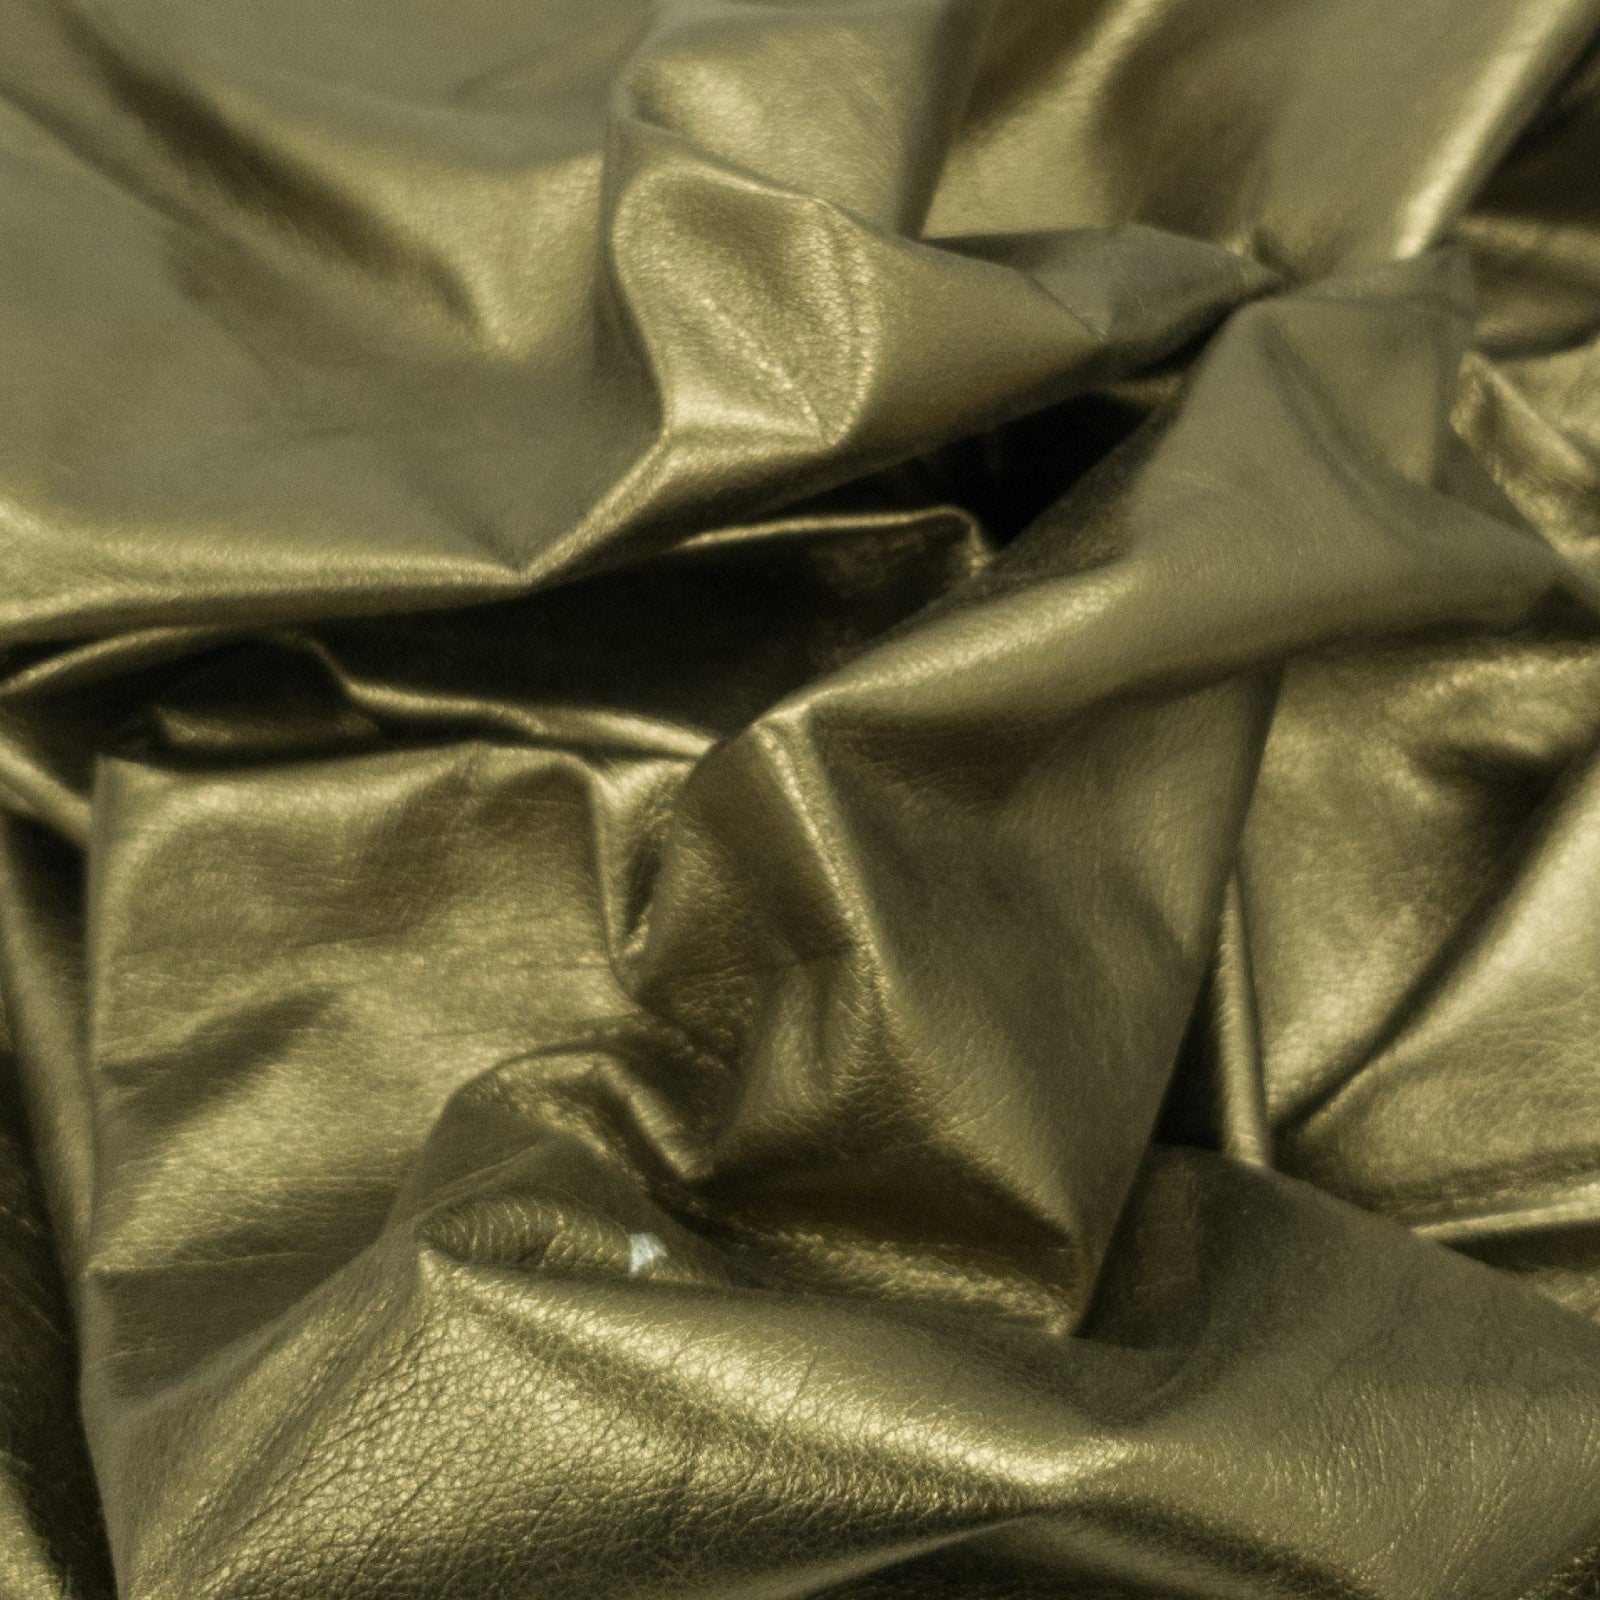 Slight Shimmer, 5-10 Sq Ft, Lamb Hides, Fools Gold / 5-6 | The Leather Guy